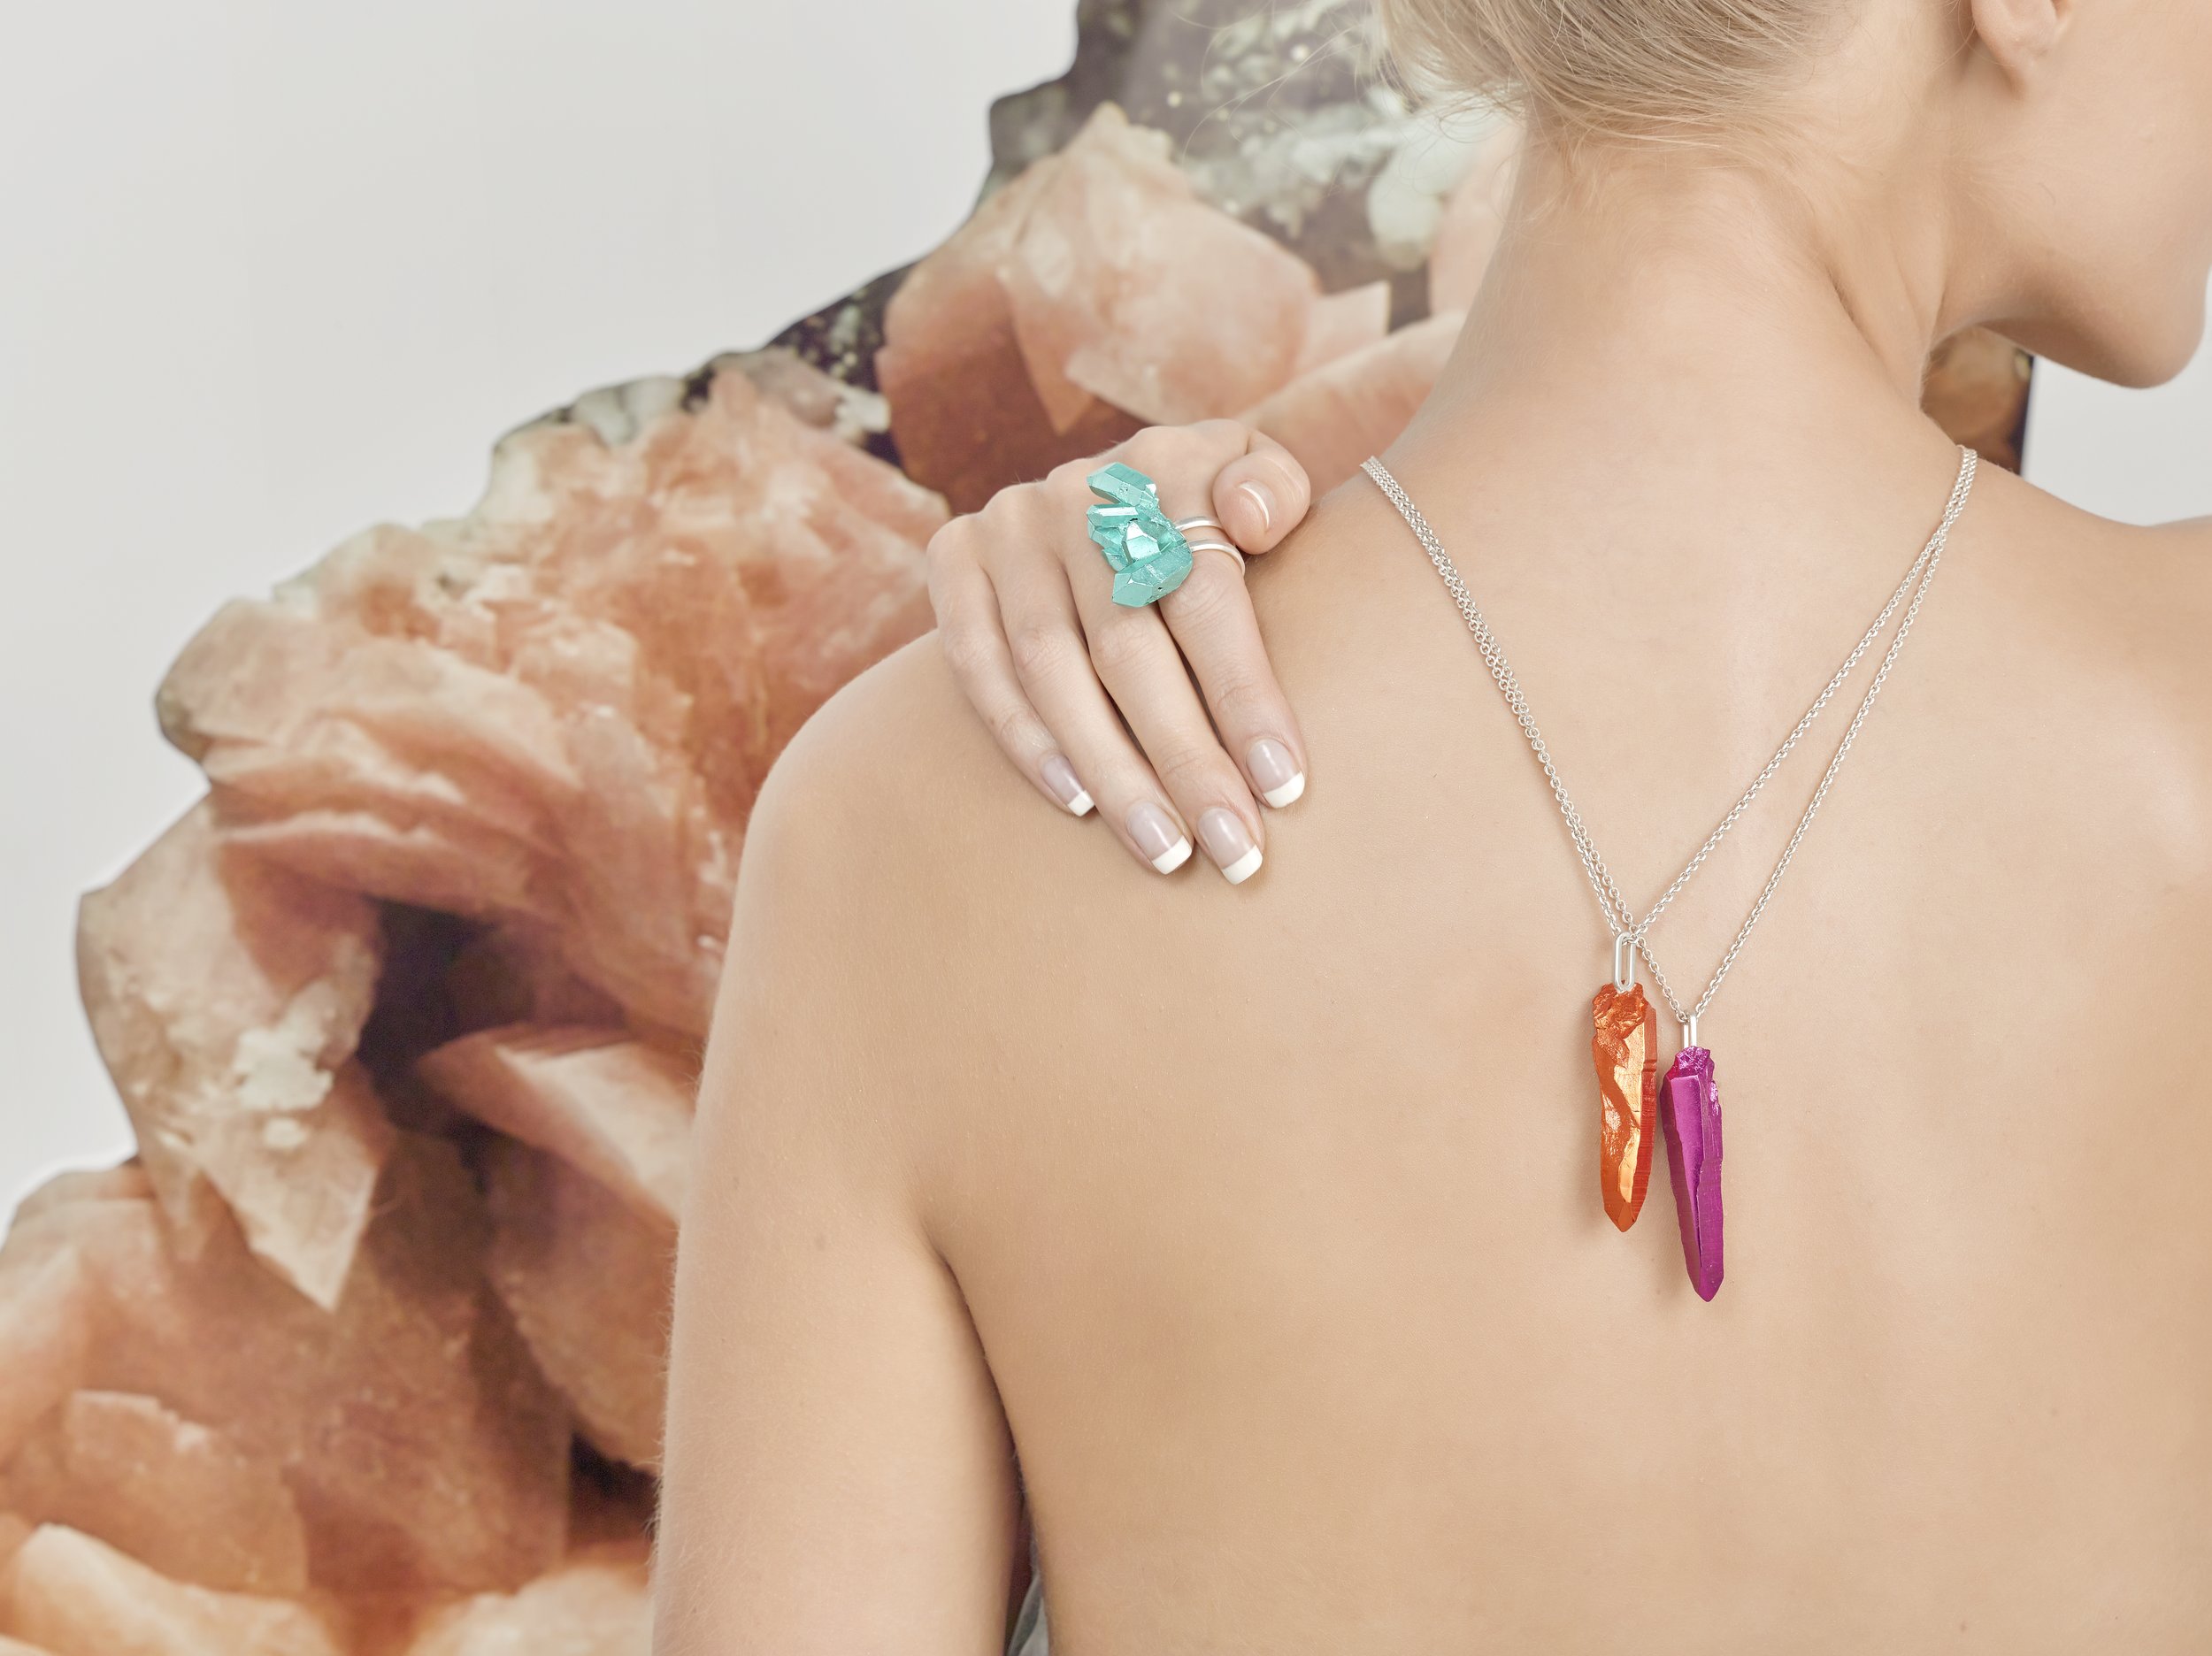 HotRocks Trigonal Large Cluster Ring in Turquoise and Pendants in Orange and Pink copy.jpg